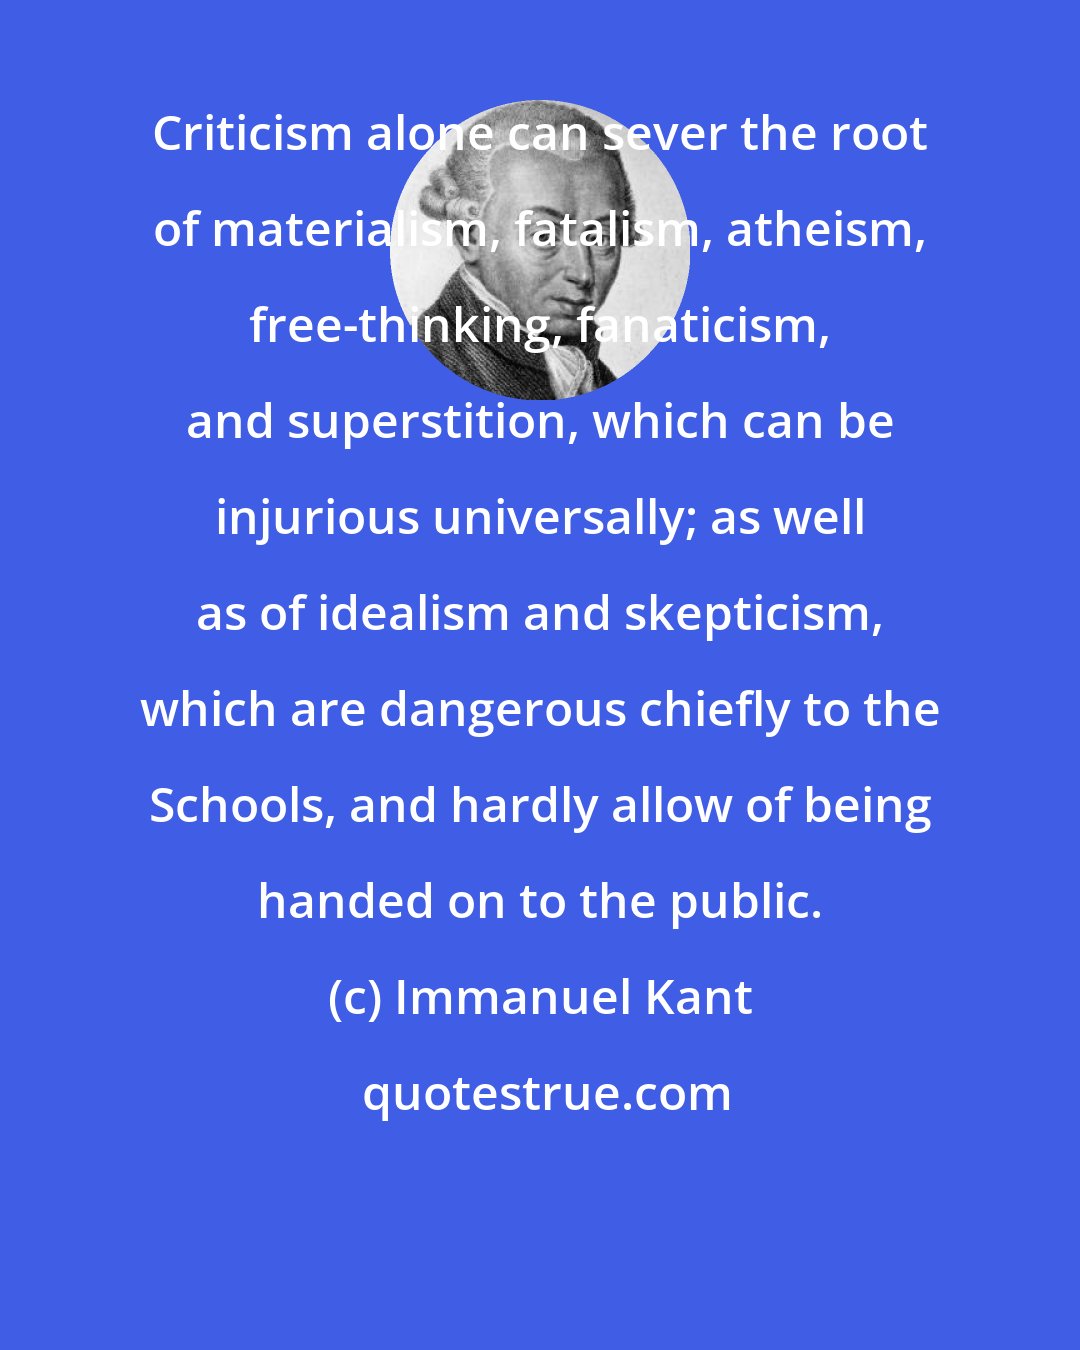 Immanuel Kant: Criticism alone can sever the root of materialism, fatalism, atheism, free-thinking, fanaticism, and superstition, which can be injurious universally; as well as of idealism and skepticism, which are dangerous chiefly to the Schools, and hardly allow of being handed on to the public.